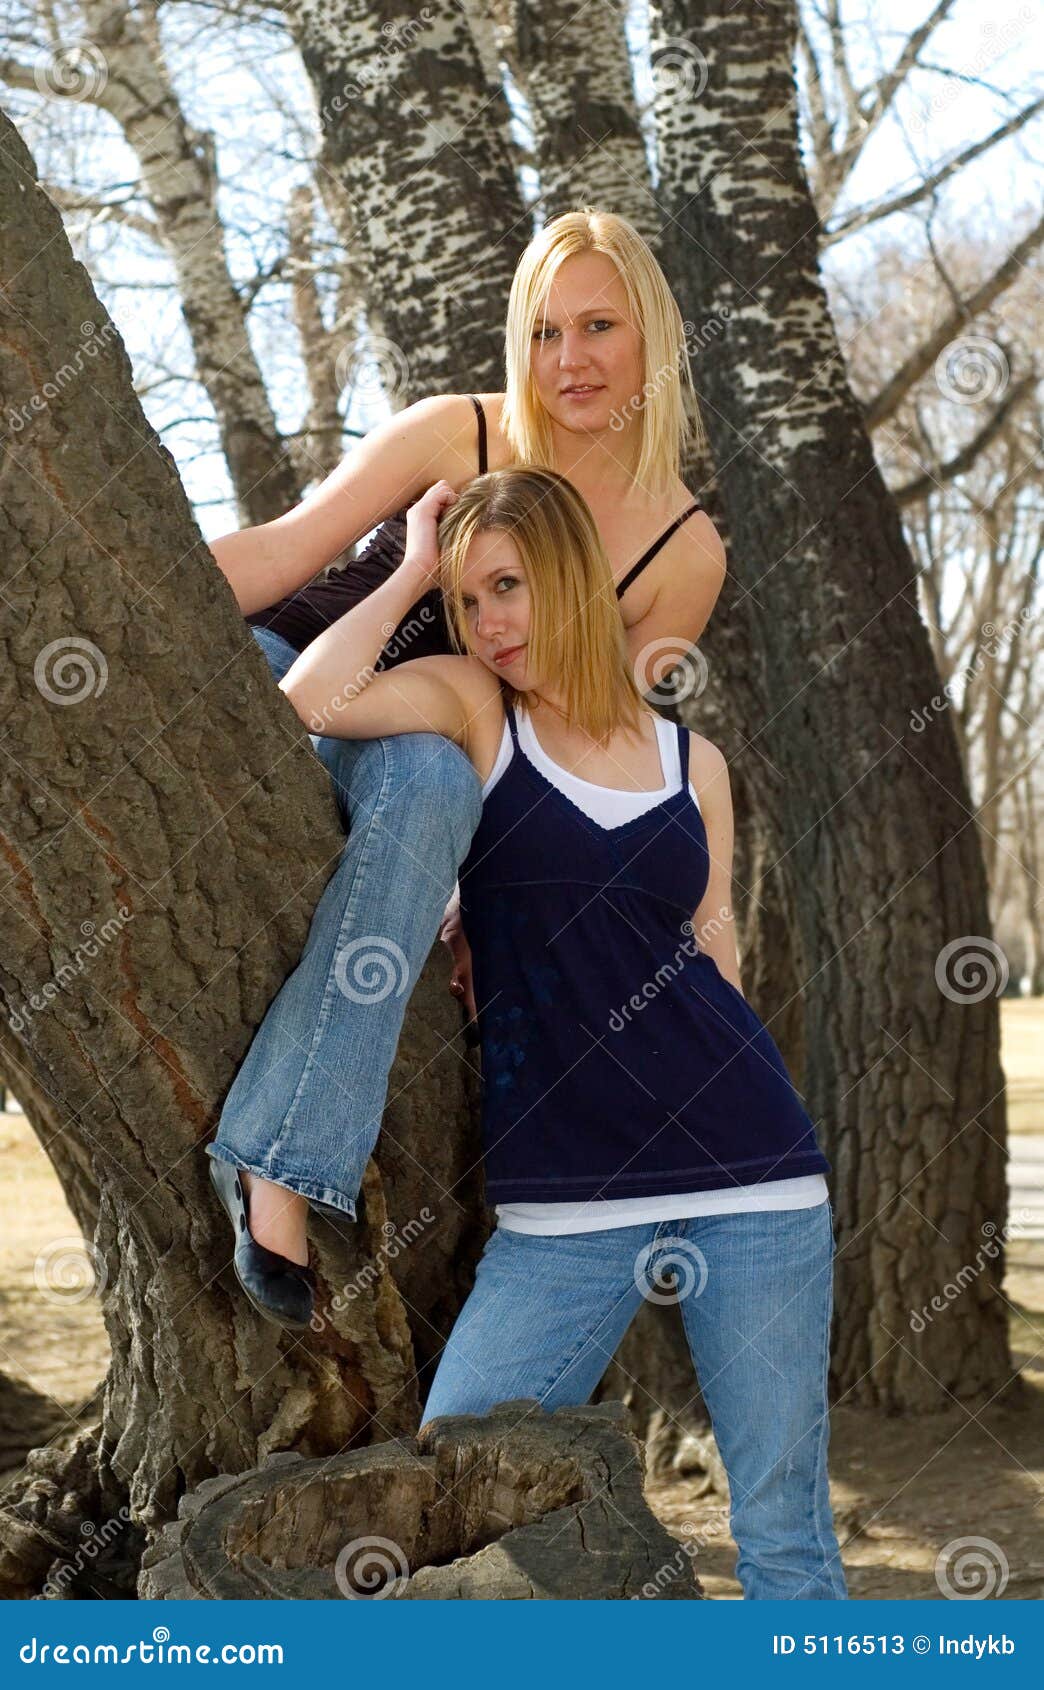 blondes and trees